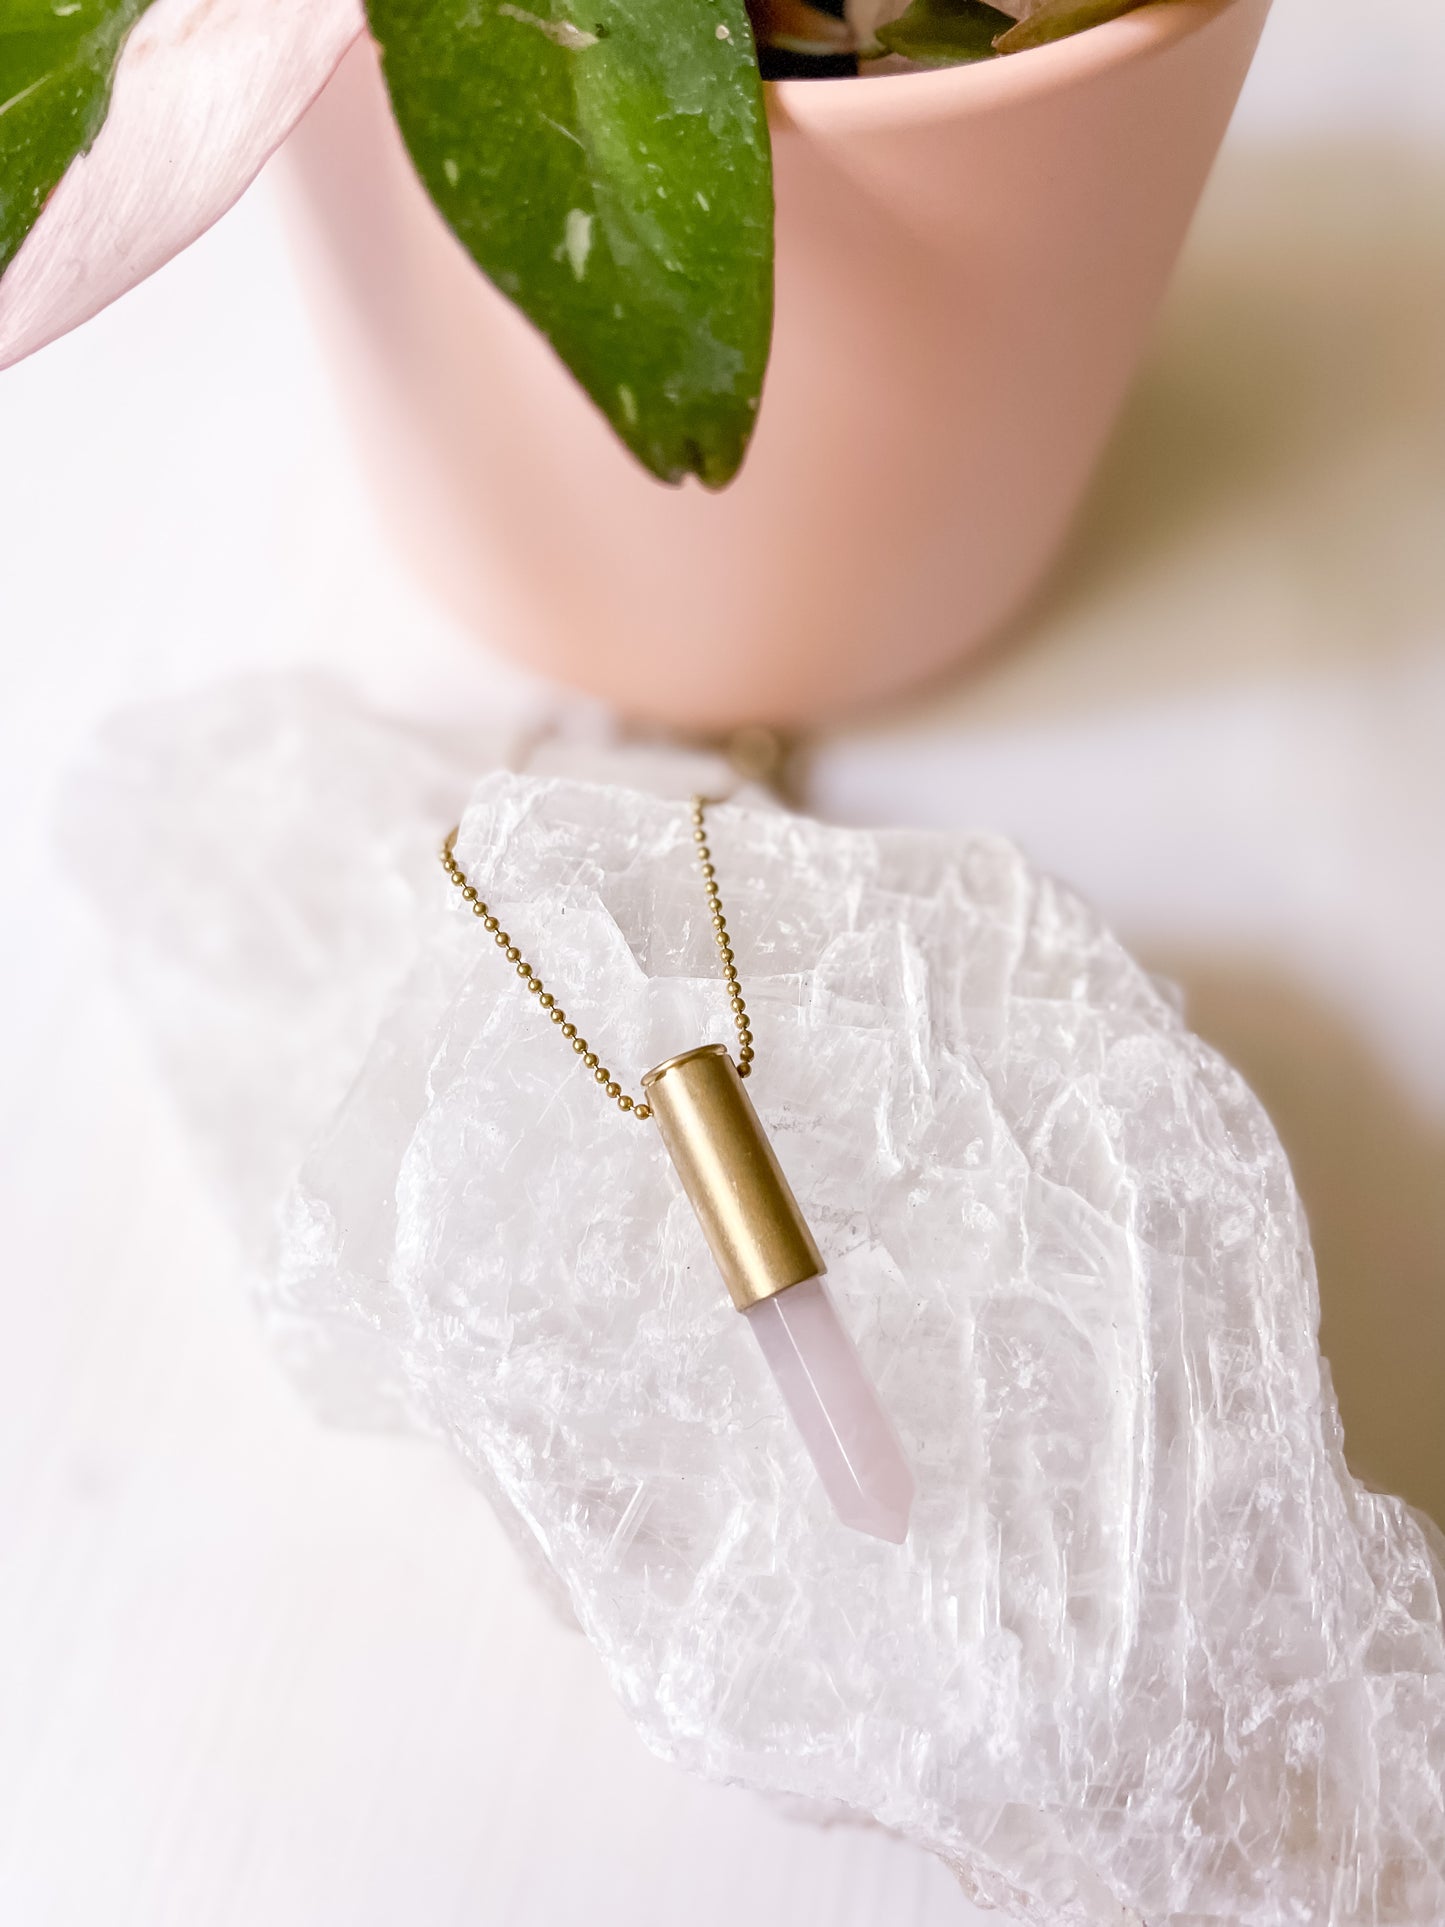 Crystal Bullet Necklaces